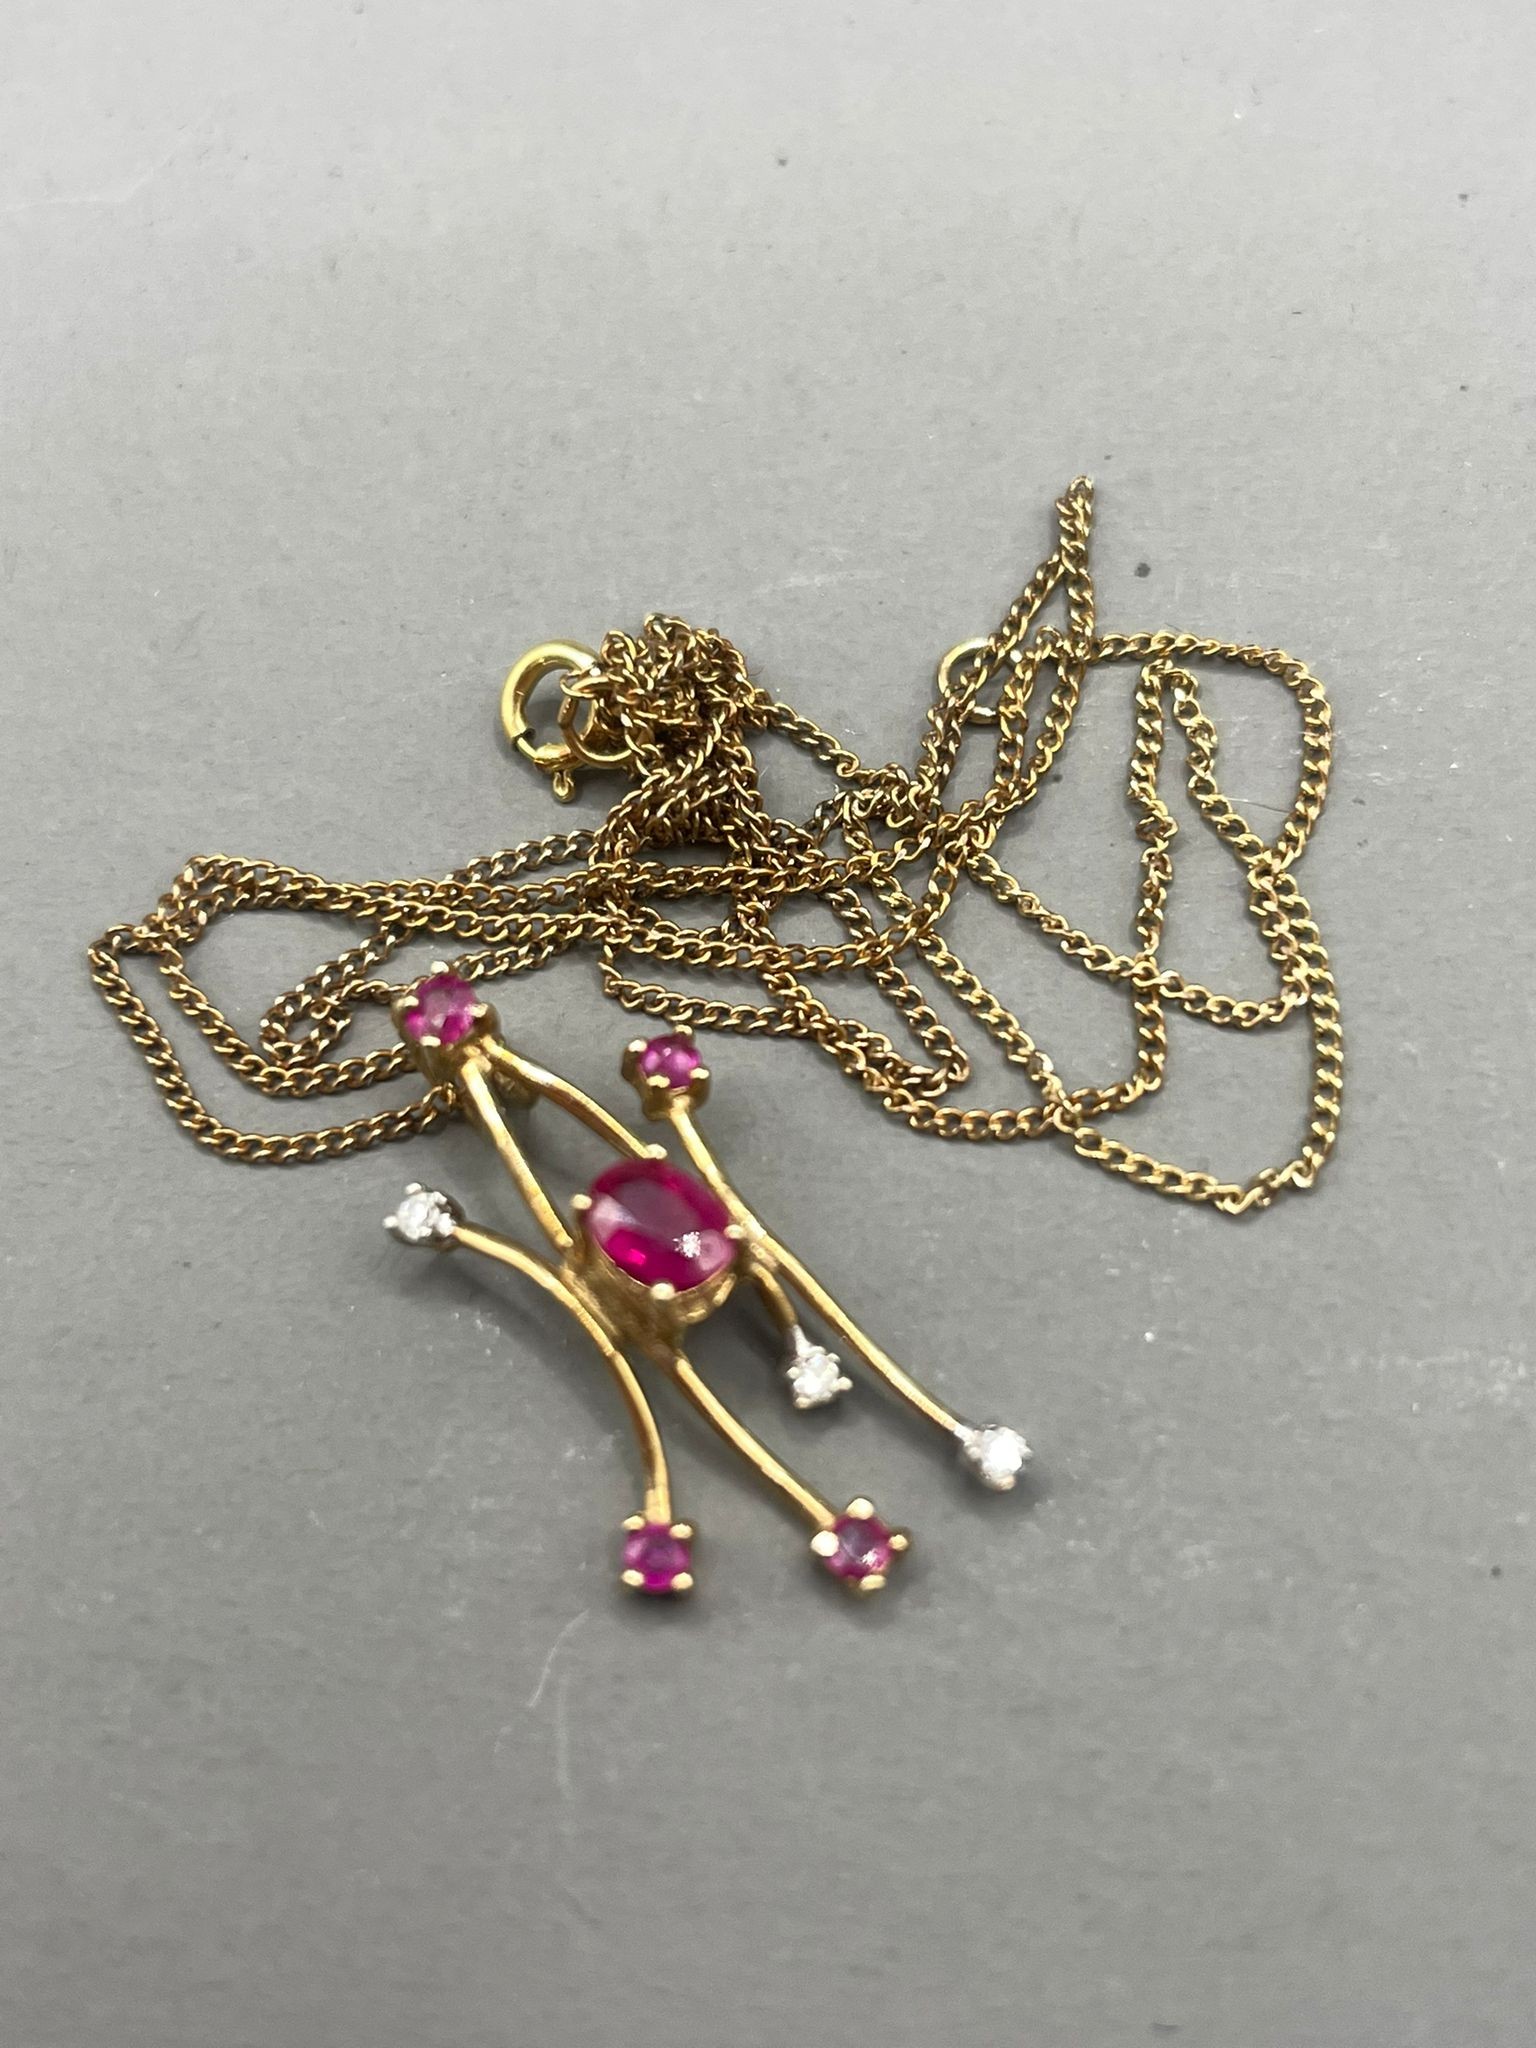 A 9k yellow gold ruby and diamond pendant necklace, gross weight approx 1.4g - Image 2 of 3